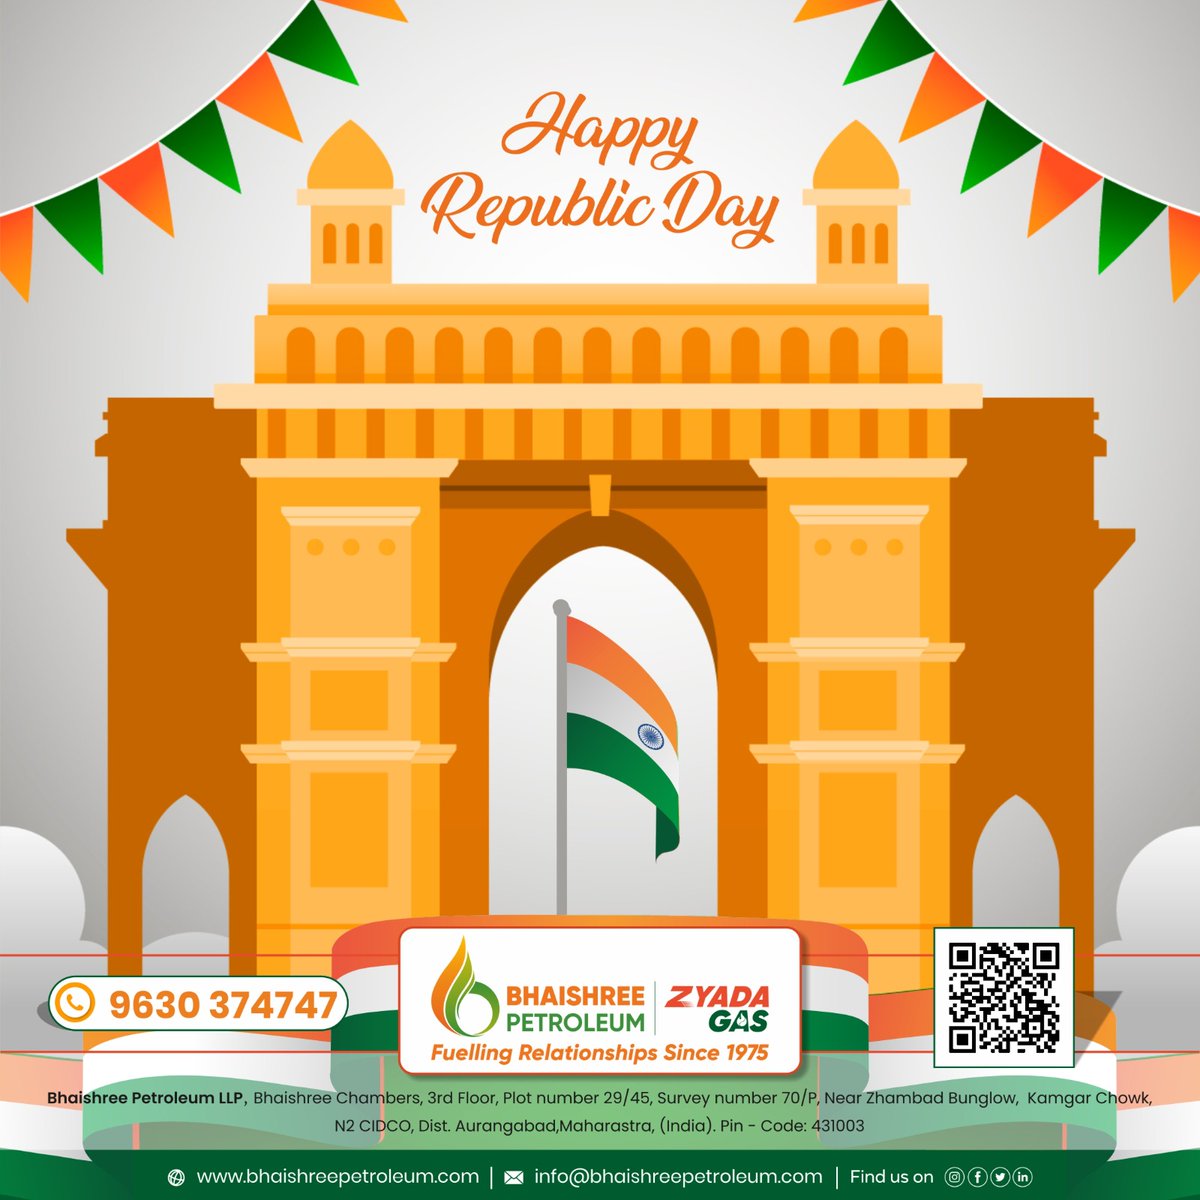 May the pride of being Indian fill your heart with joy and gratitude. Happy Republic Day to you and your family.
#bhaishreeventure #zyadagasautolpg #bhaishreepetroleum #ALDS #VikramTea
#republicday2024 #india #worldtraveler